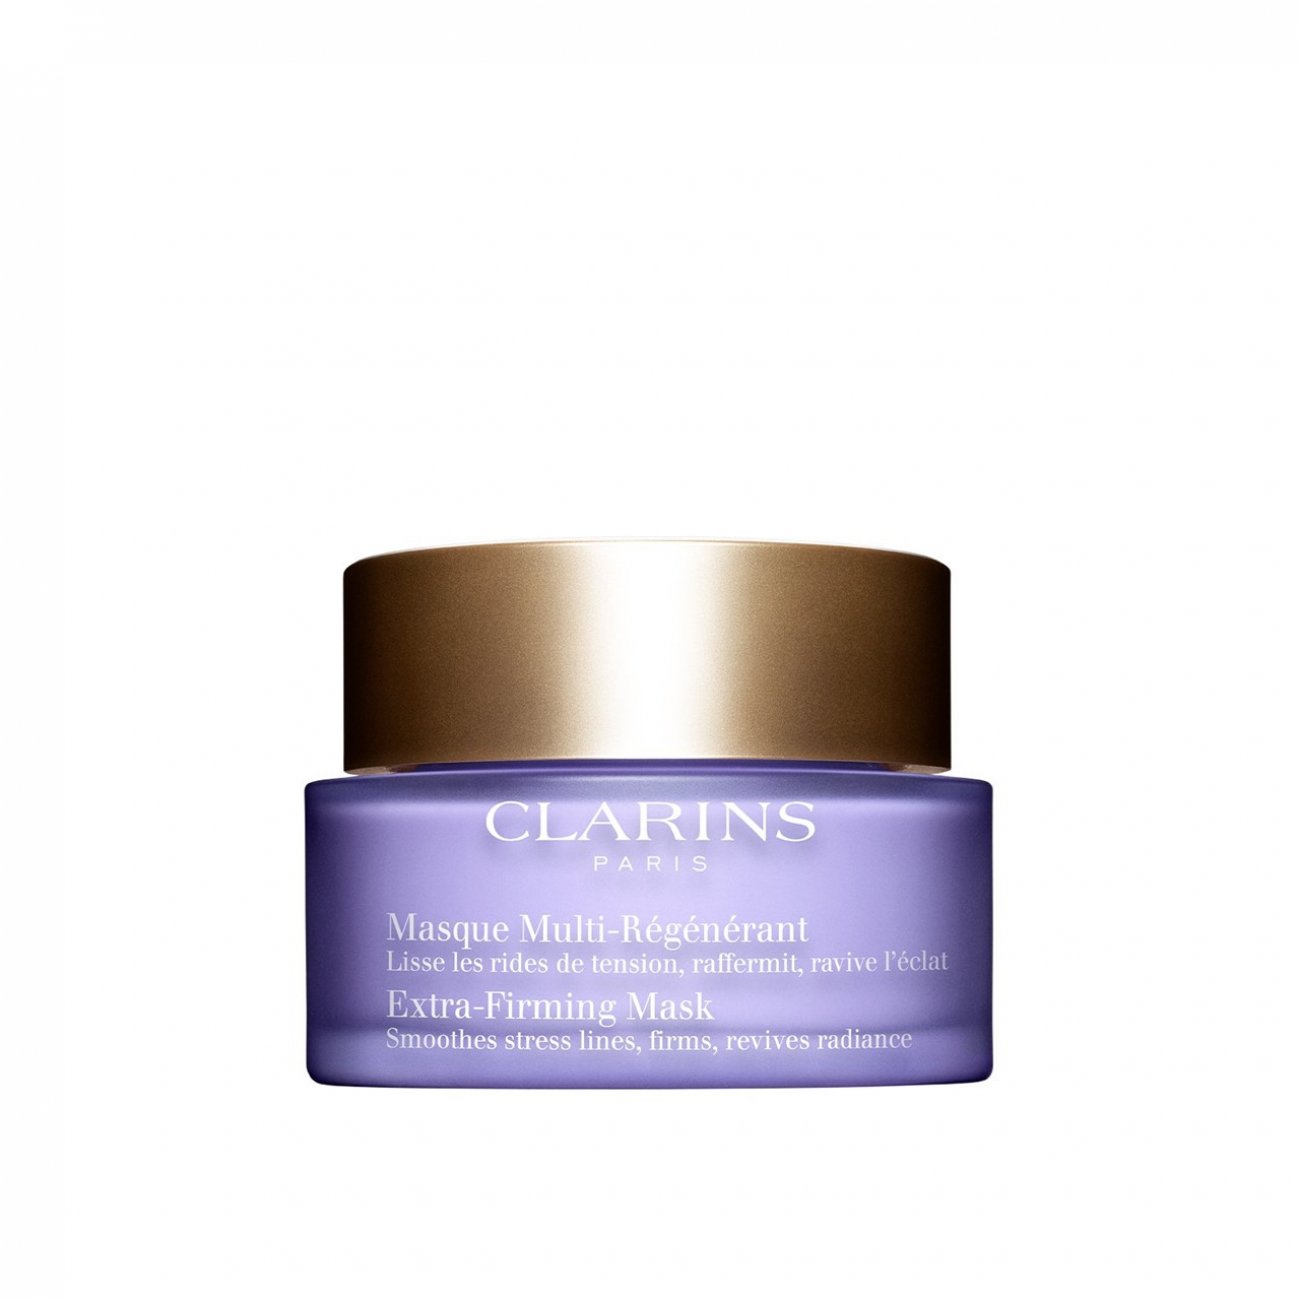 handle apt værdighed Buy Clarins Extra-Firming Mask 75ml (2.5 oz) · USA